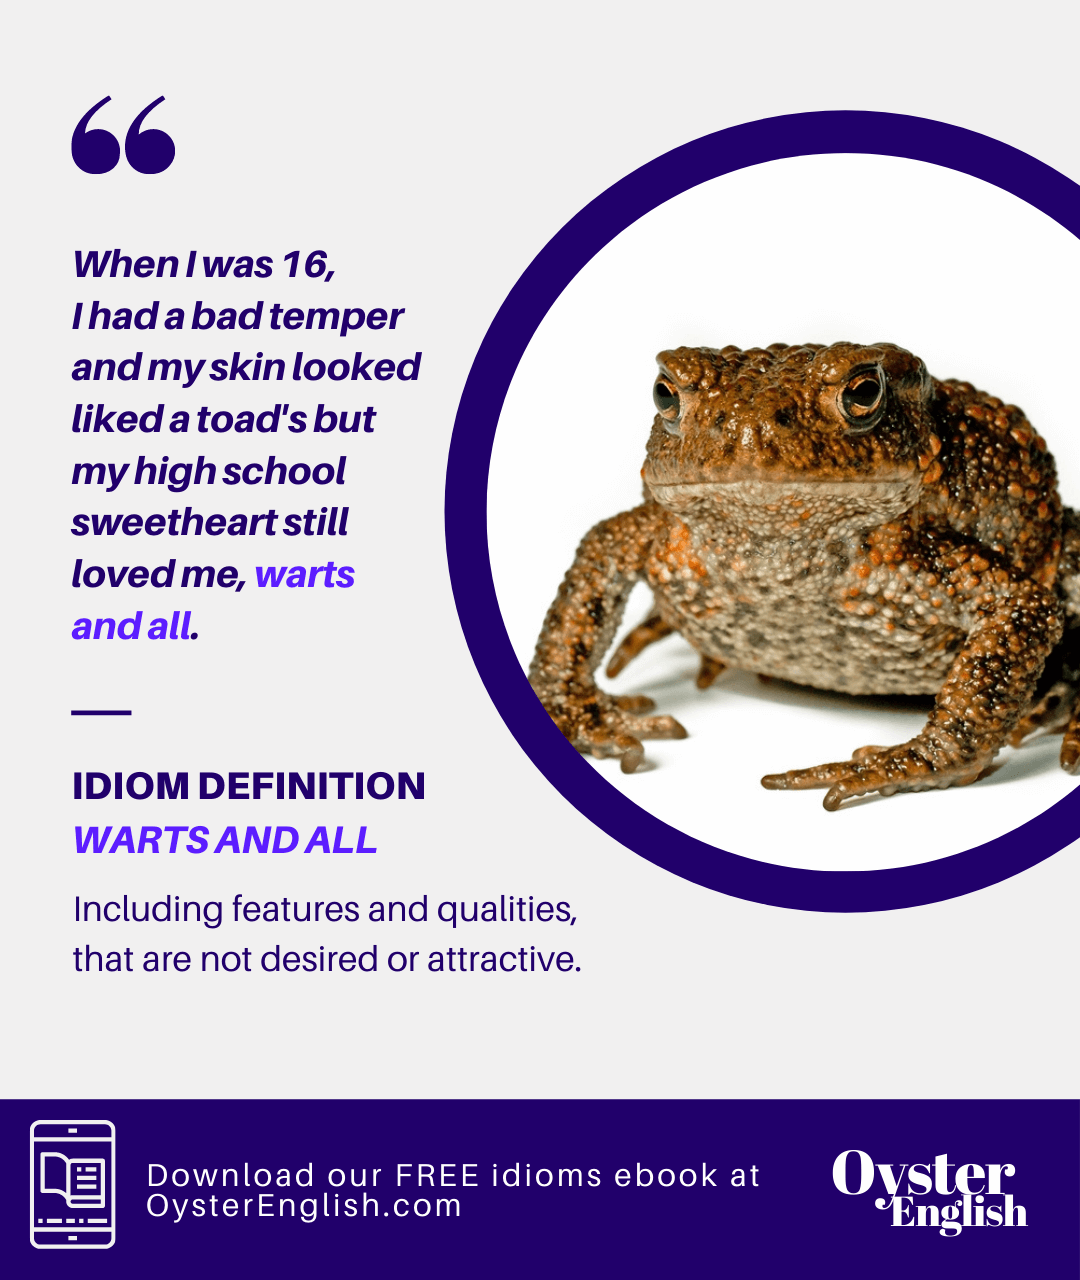 Image of a toad with many wart-like bumps on its skin. Caption: When I was 16, I had a bad temper and my skin looked like a toad's but my high school sweetheart still loved me, warts and all.